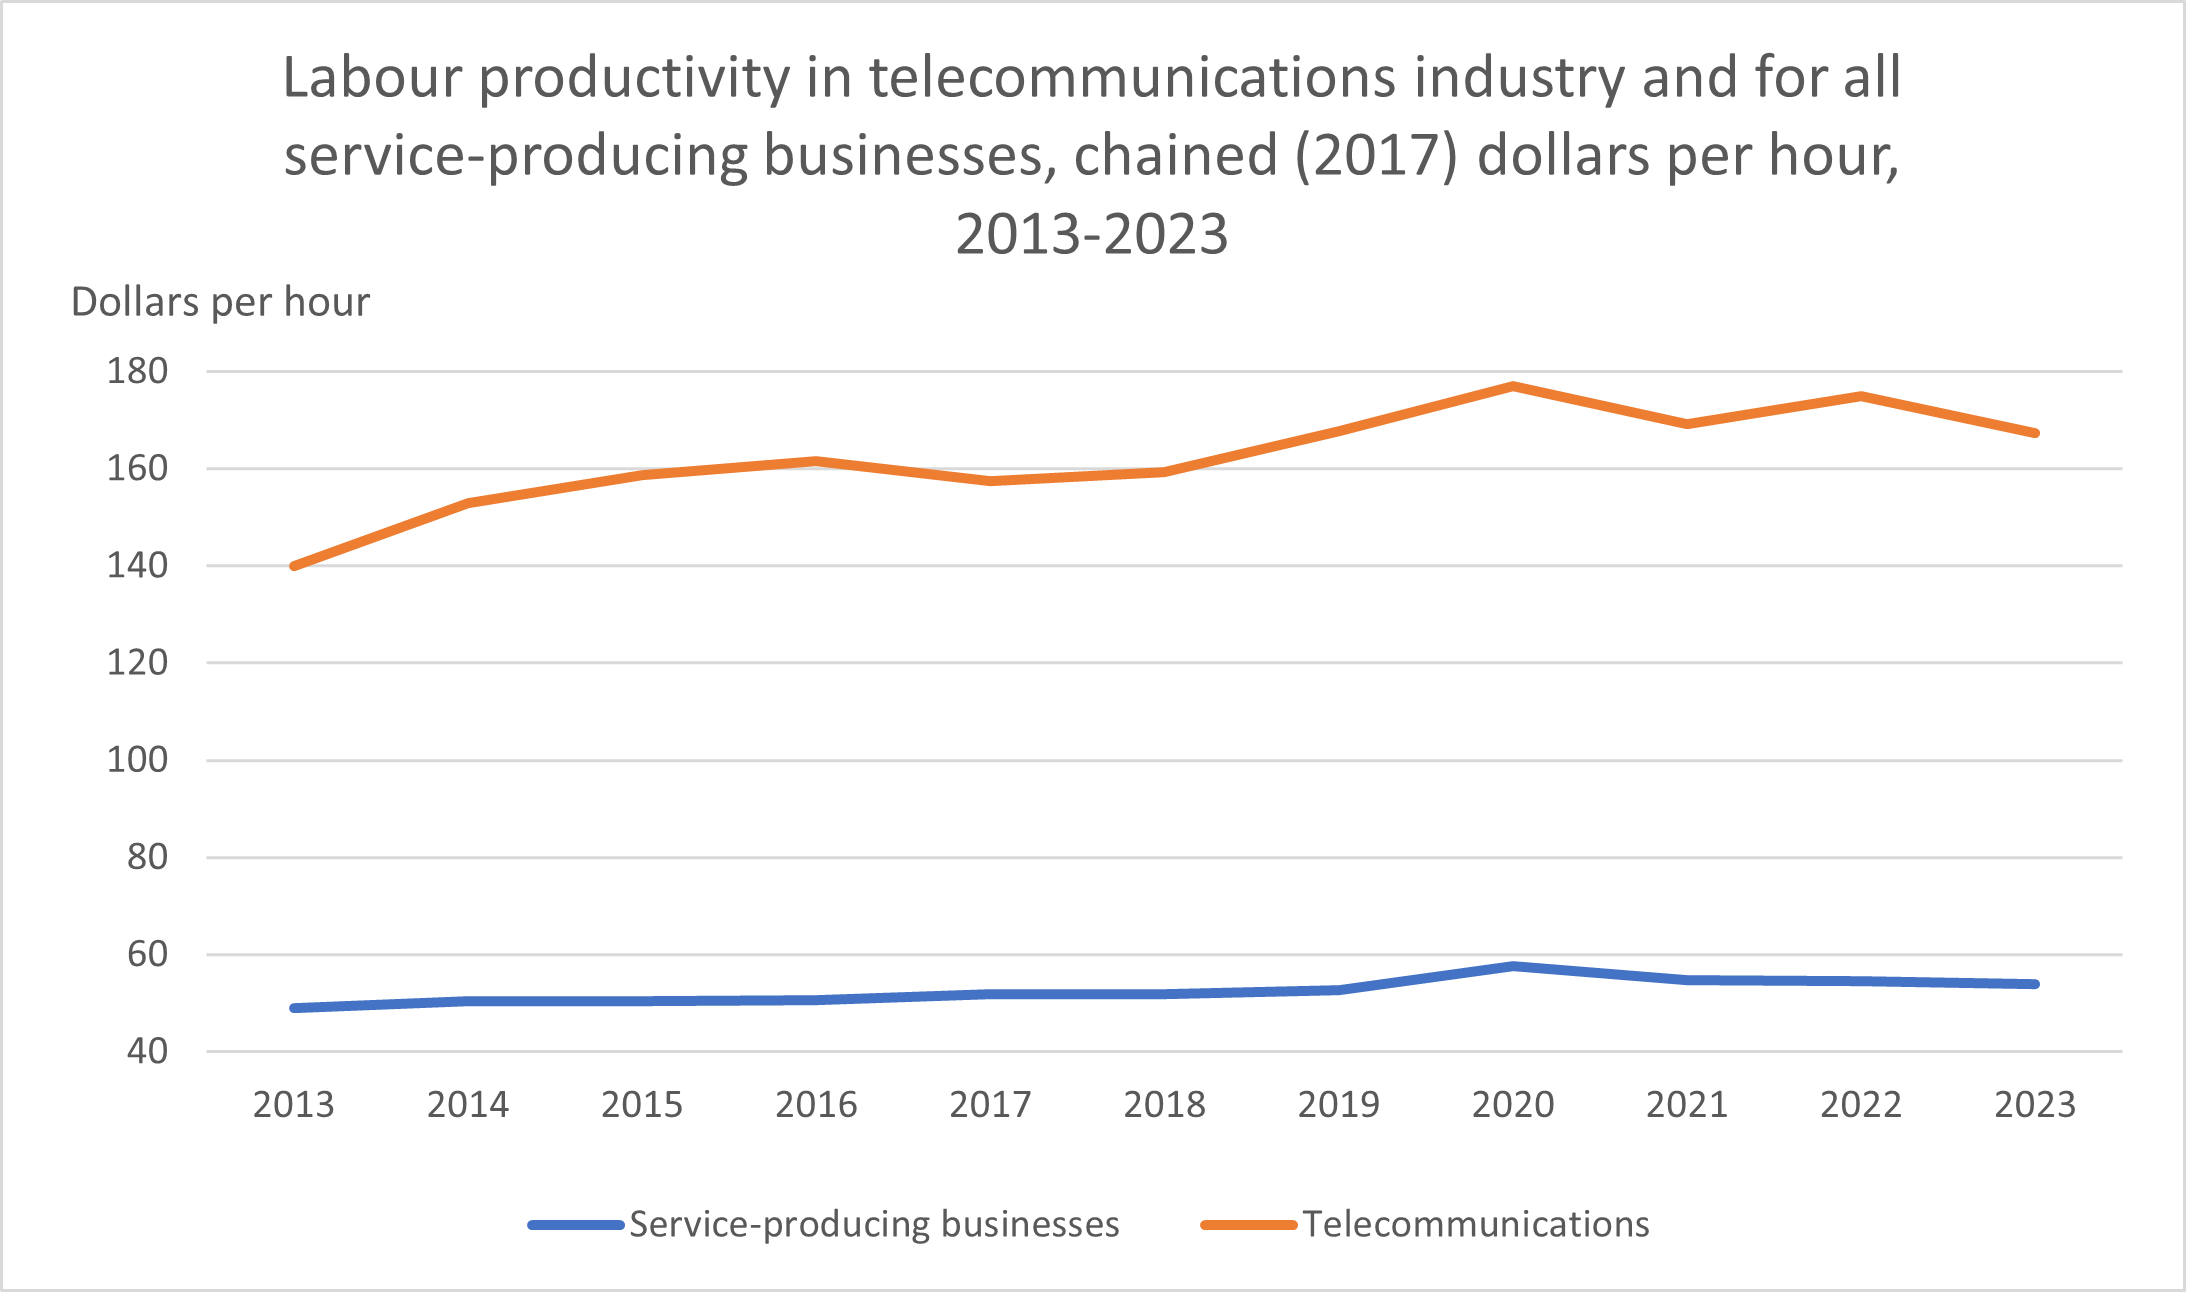 Labour productivity in telecommunications industry and for all service-producing businesses, chained (2017) dollars per hour, 2013-2023  